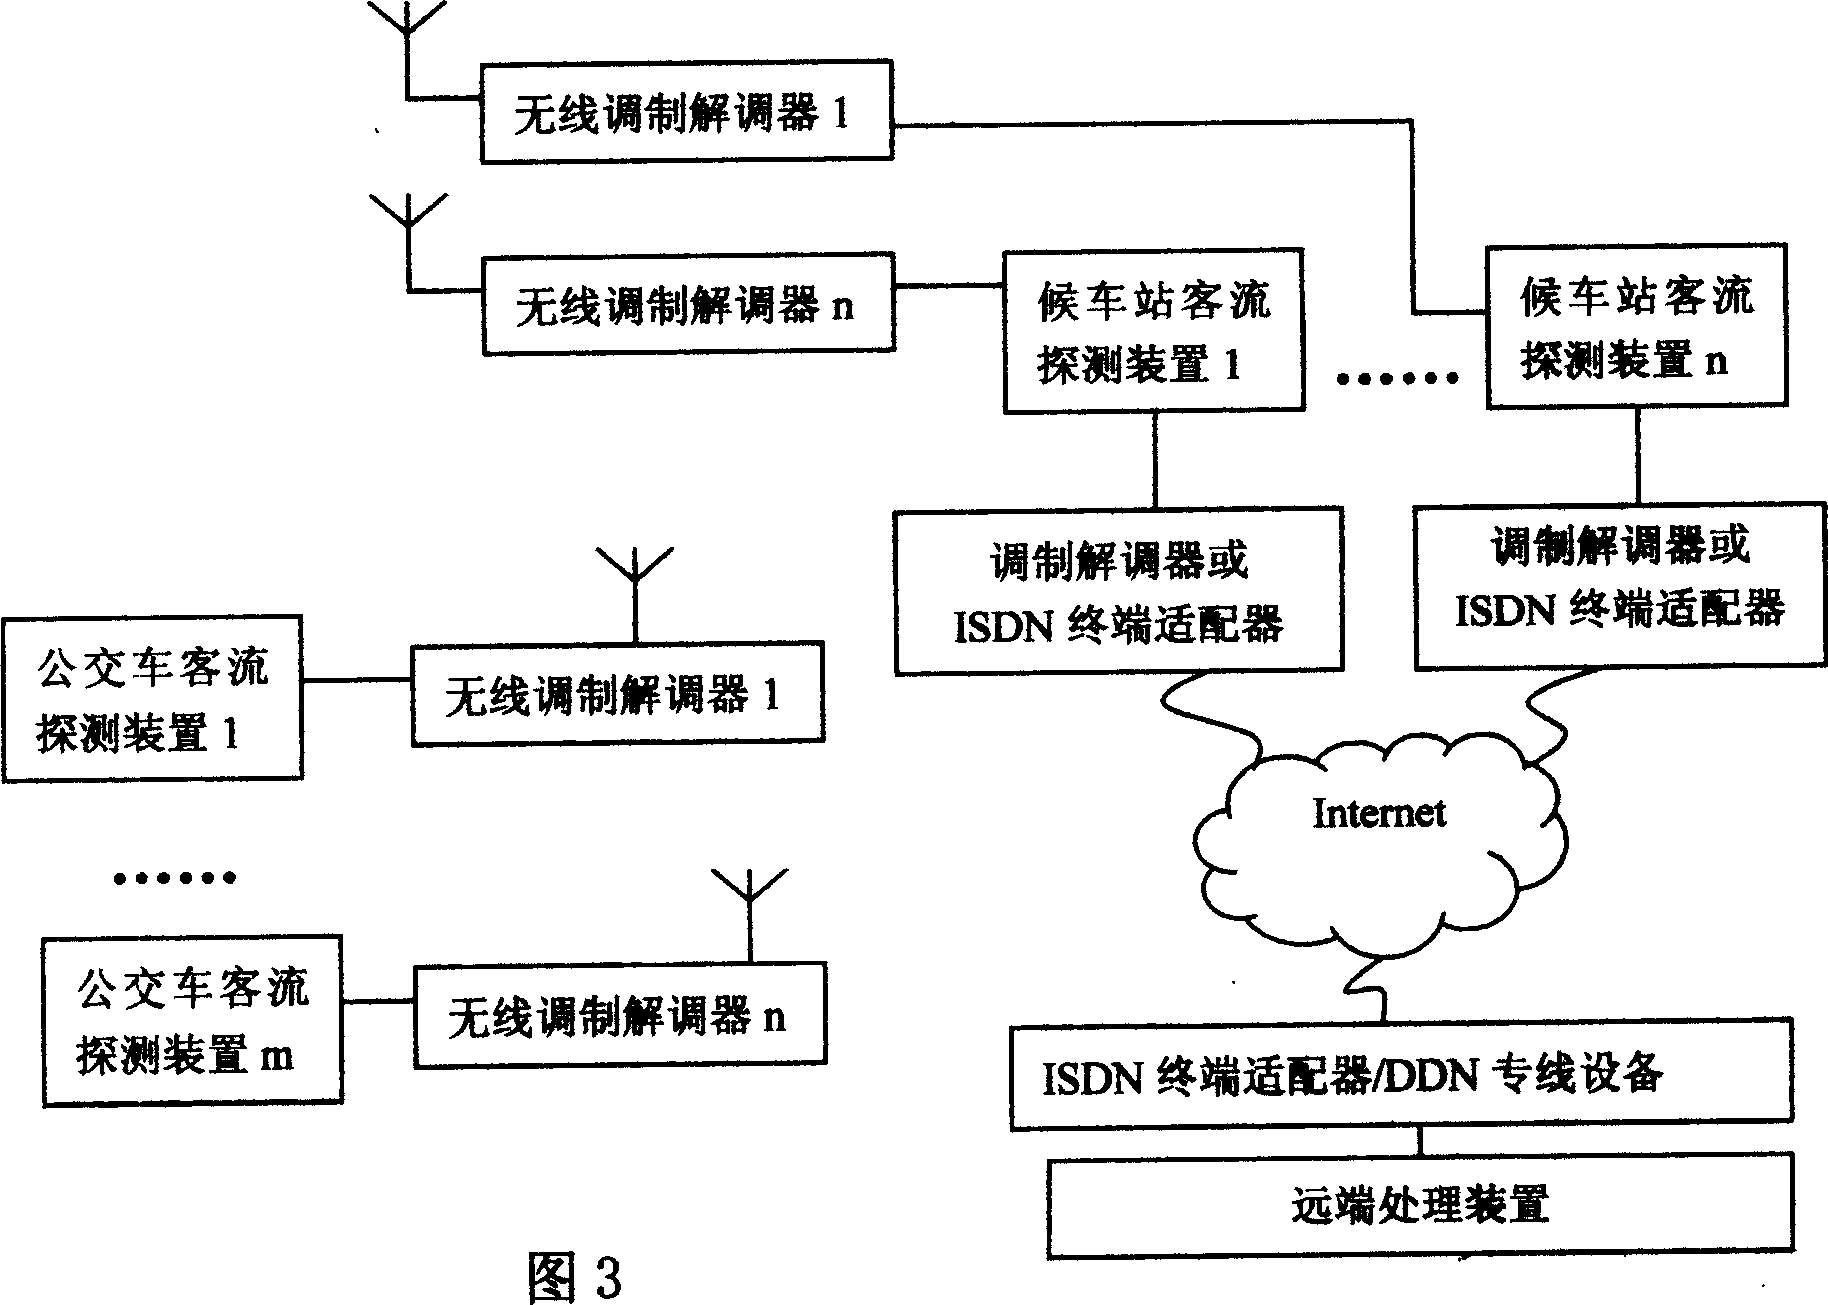 Method and device for monitoring public communication passenger flow using network remote observation